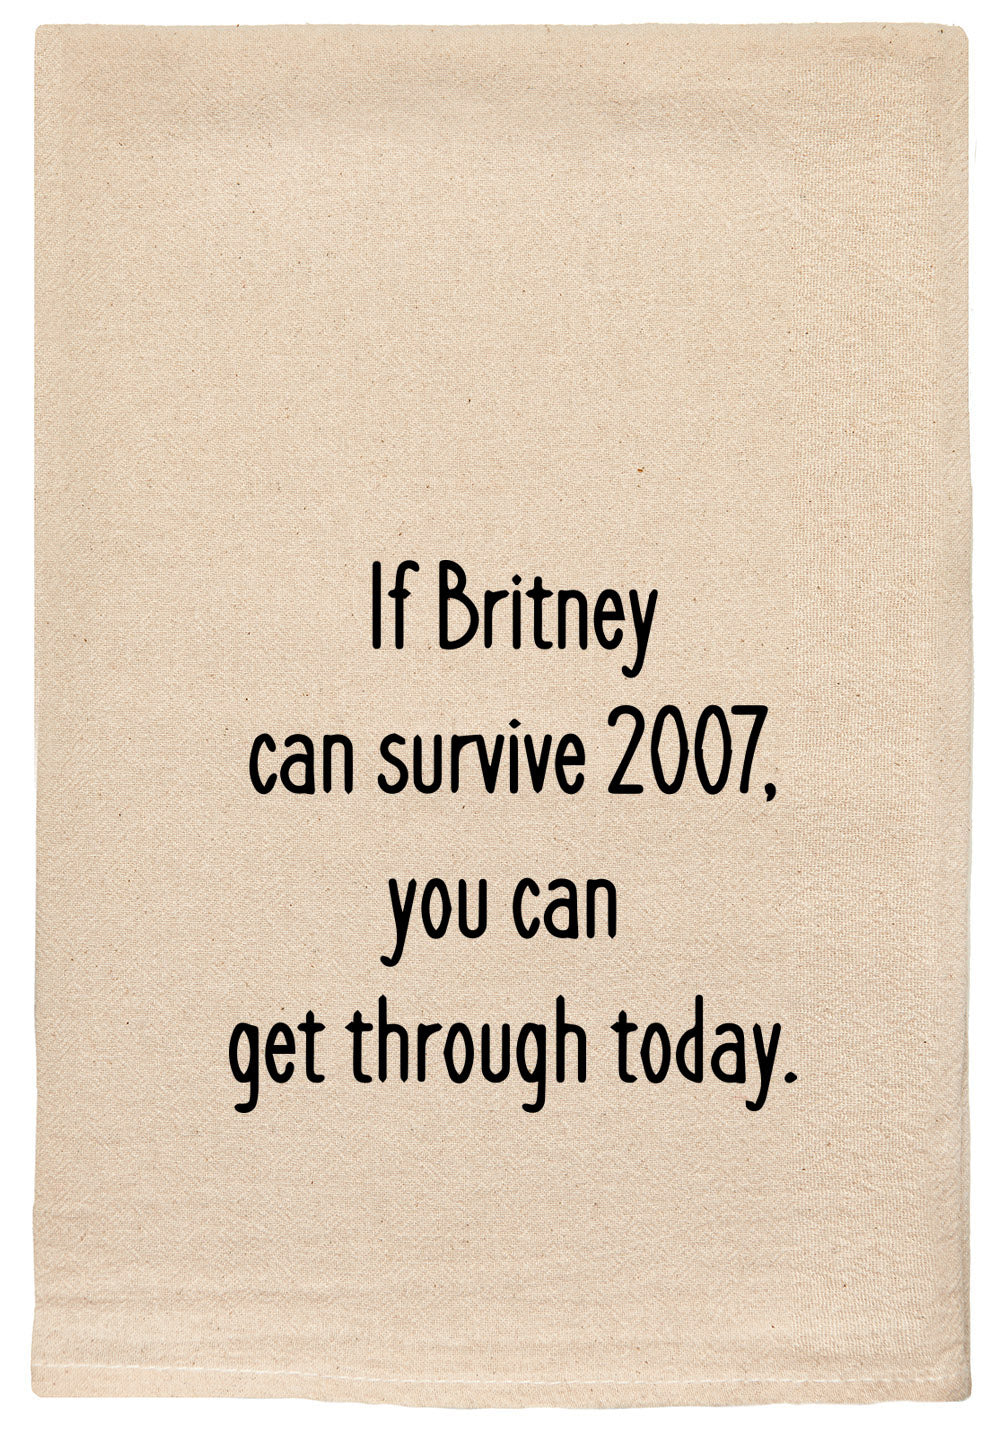 If Britney can survive 2007, you can get through today.